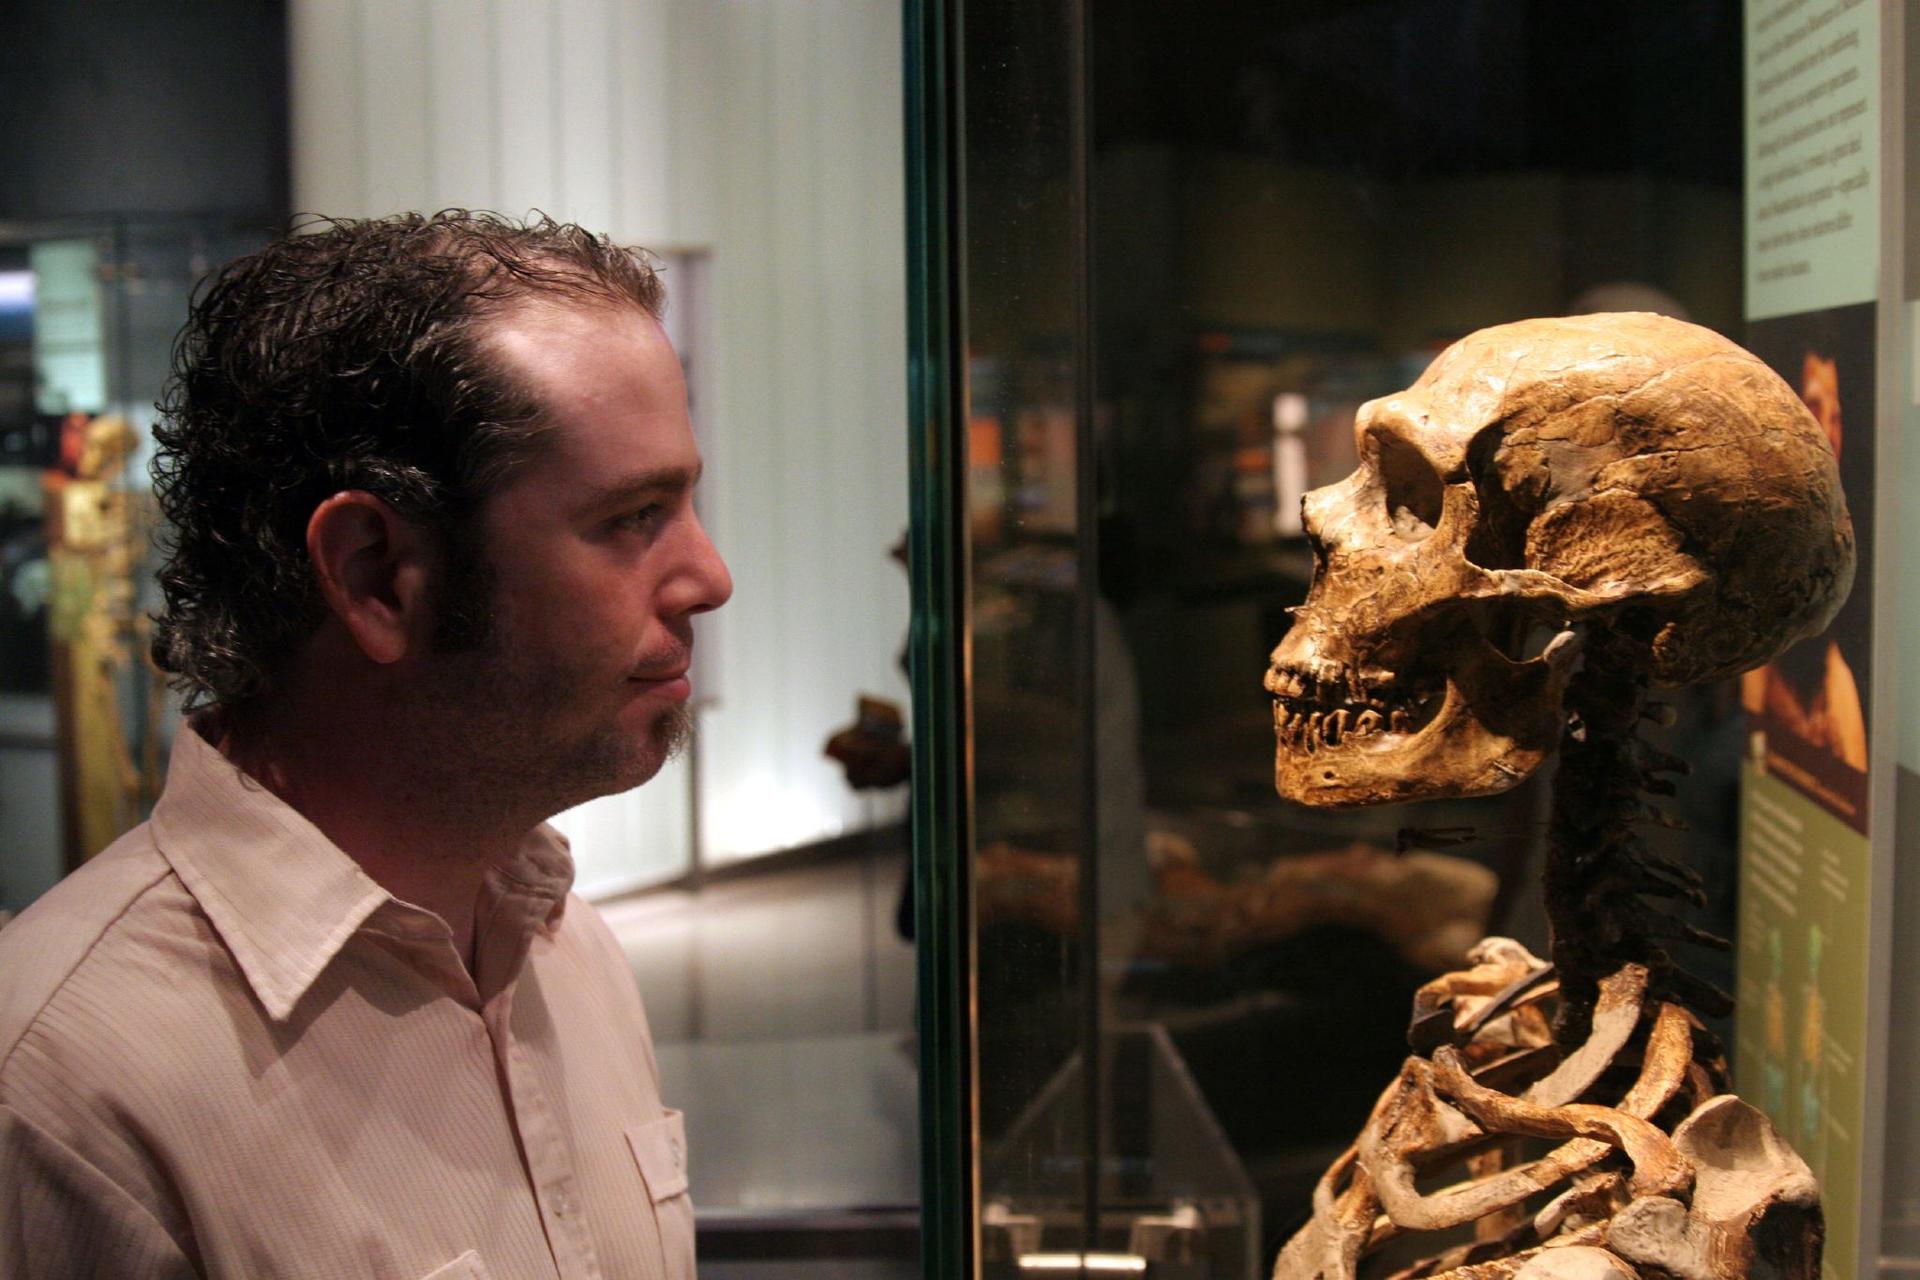 A man looks at a Neanderthal fossil at the American Museum of Natural History in New York.